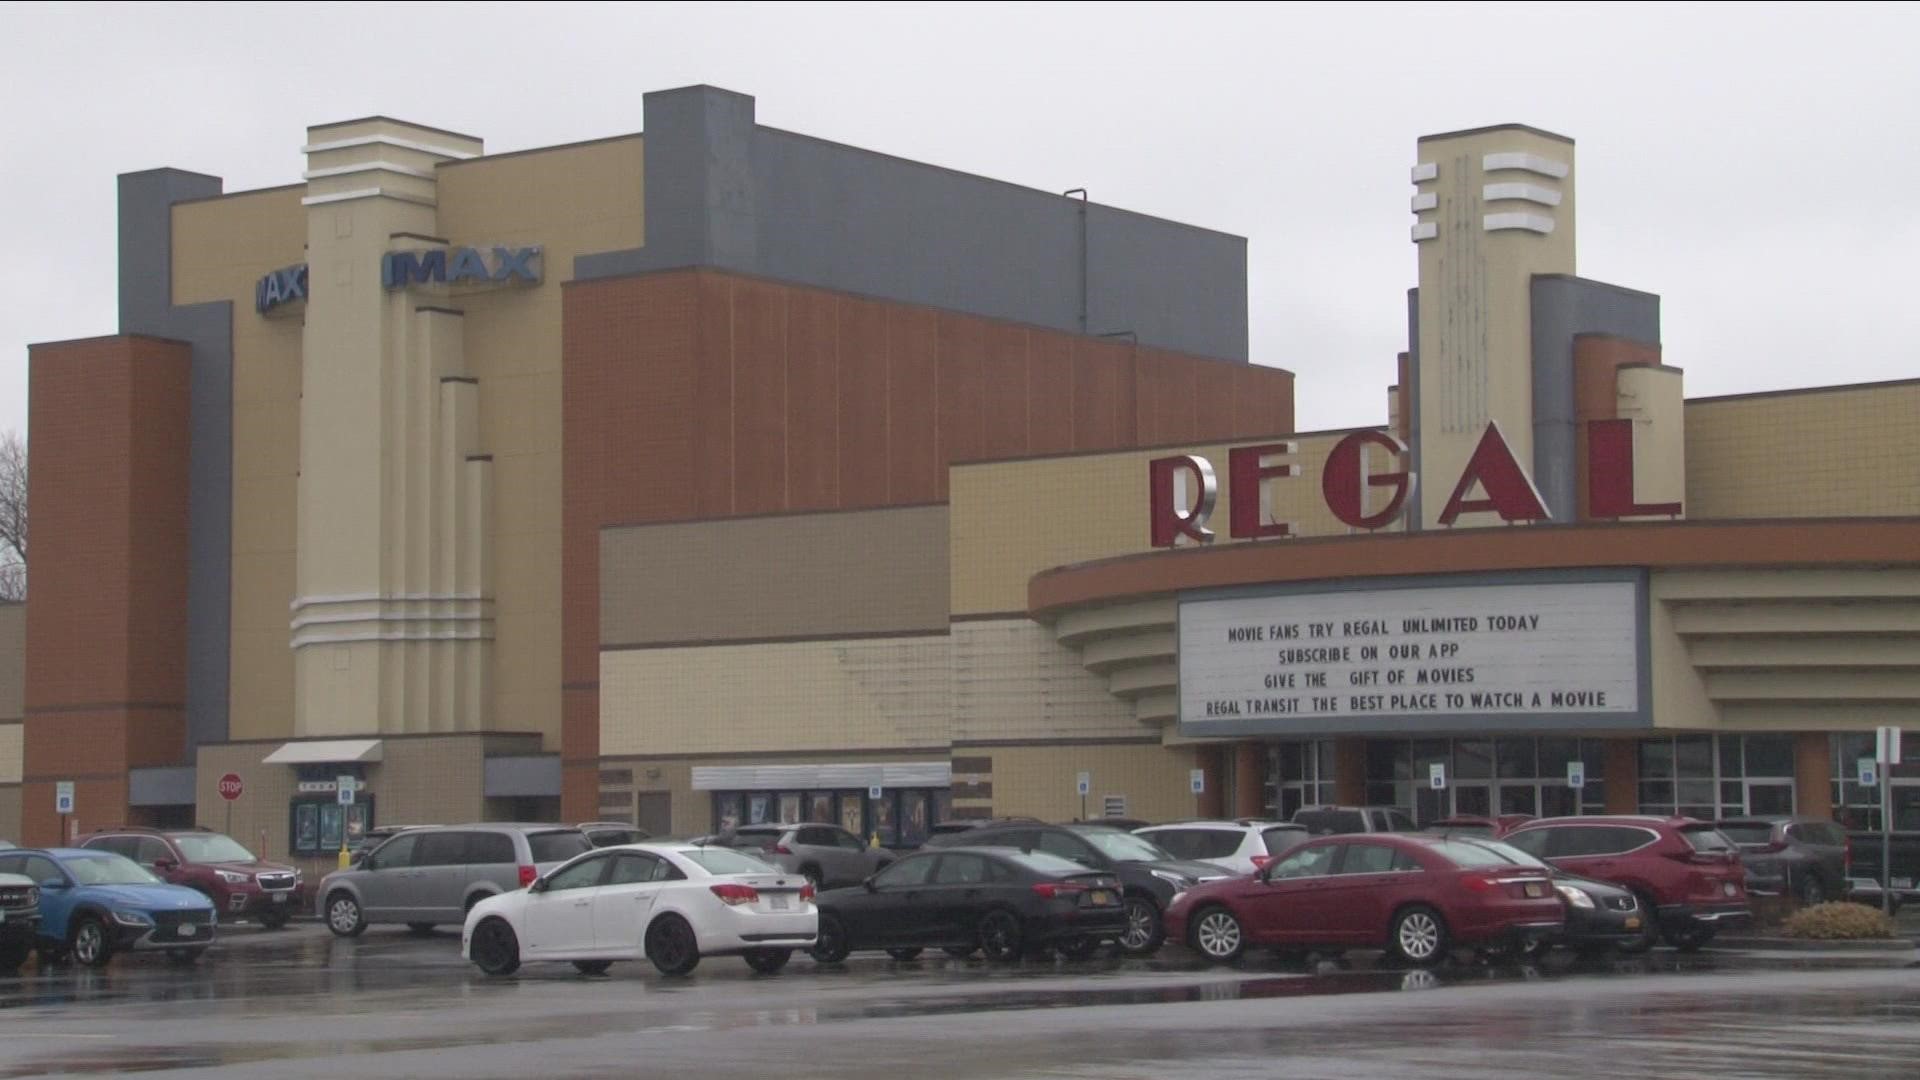 Elmwood and Transit Regal Theaters to close